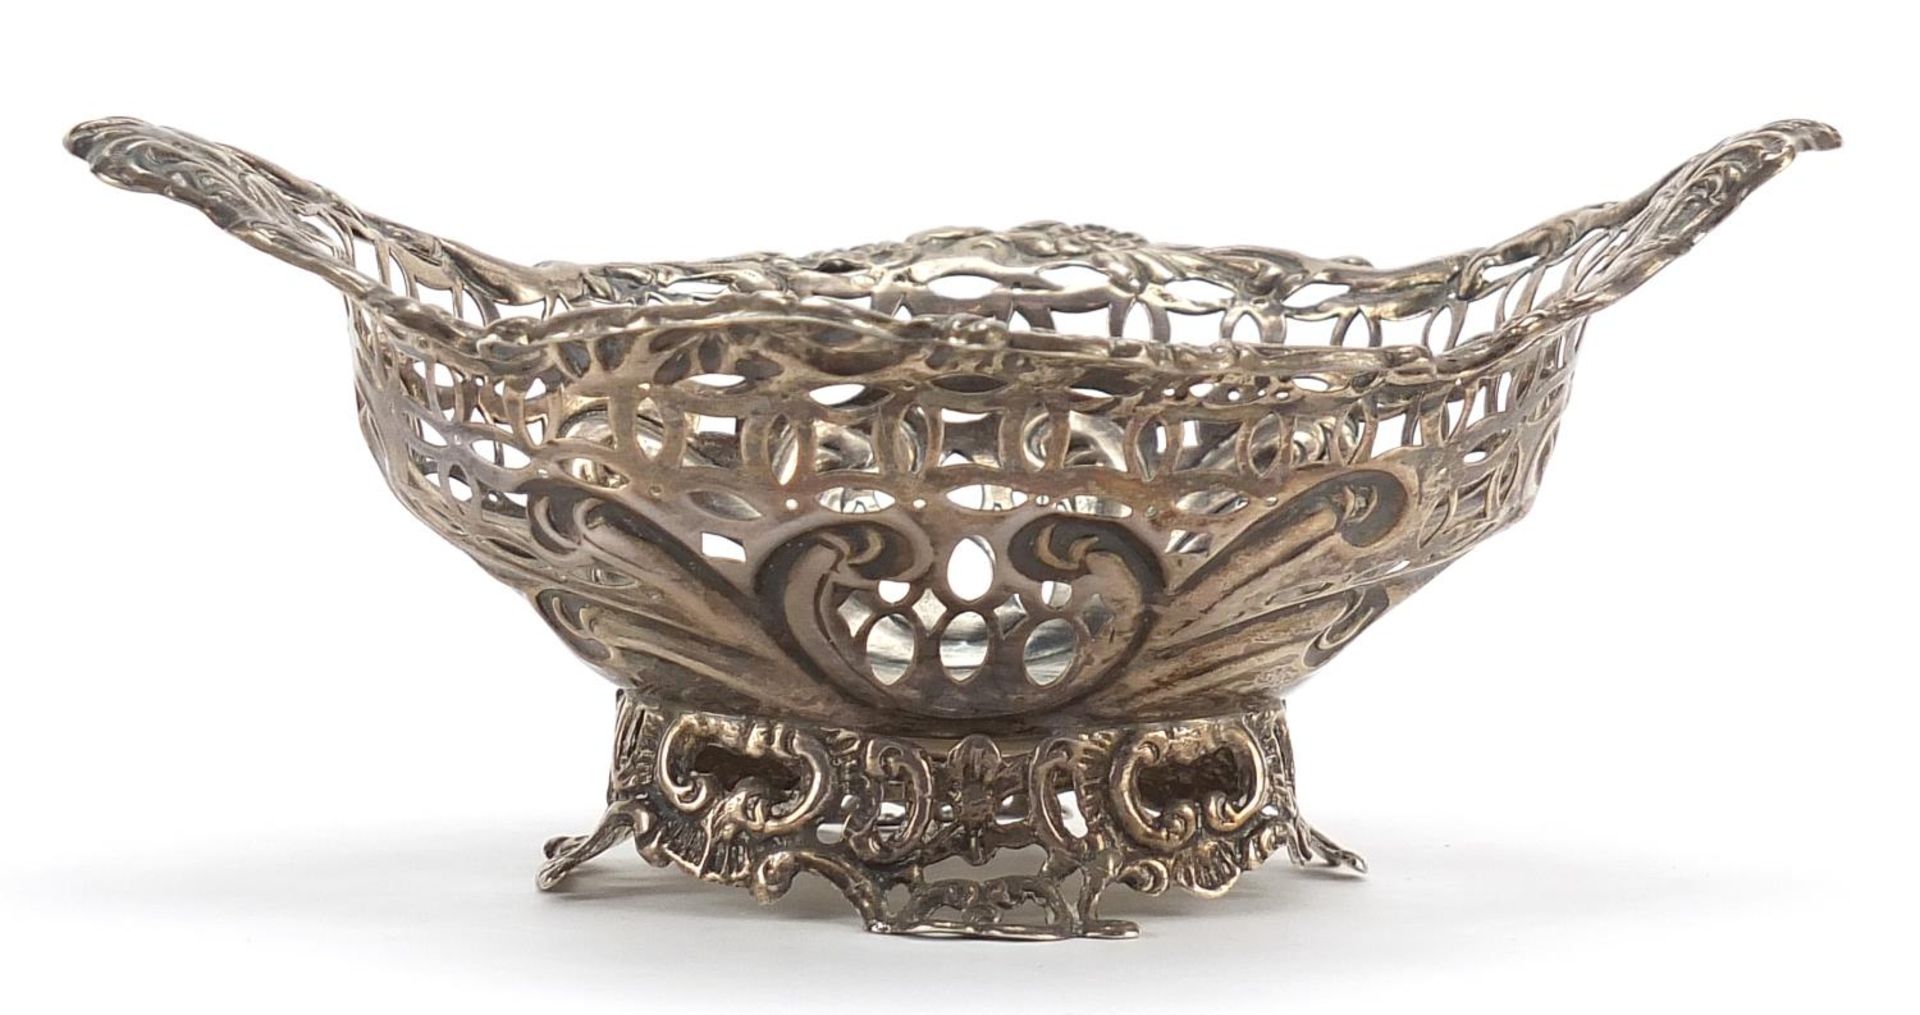 Levi & Salaman, Victorian silver bonbon dish, pierced and embossed with face masks and flowers, 16.